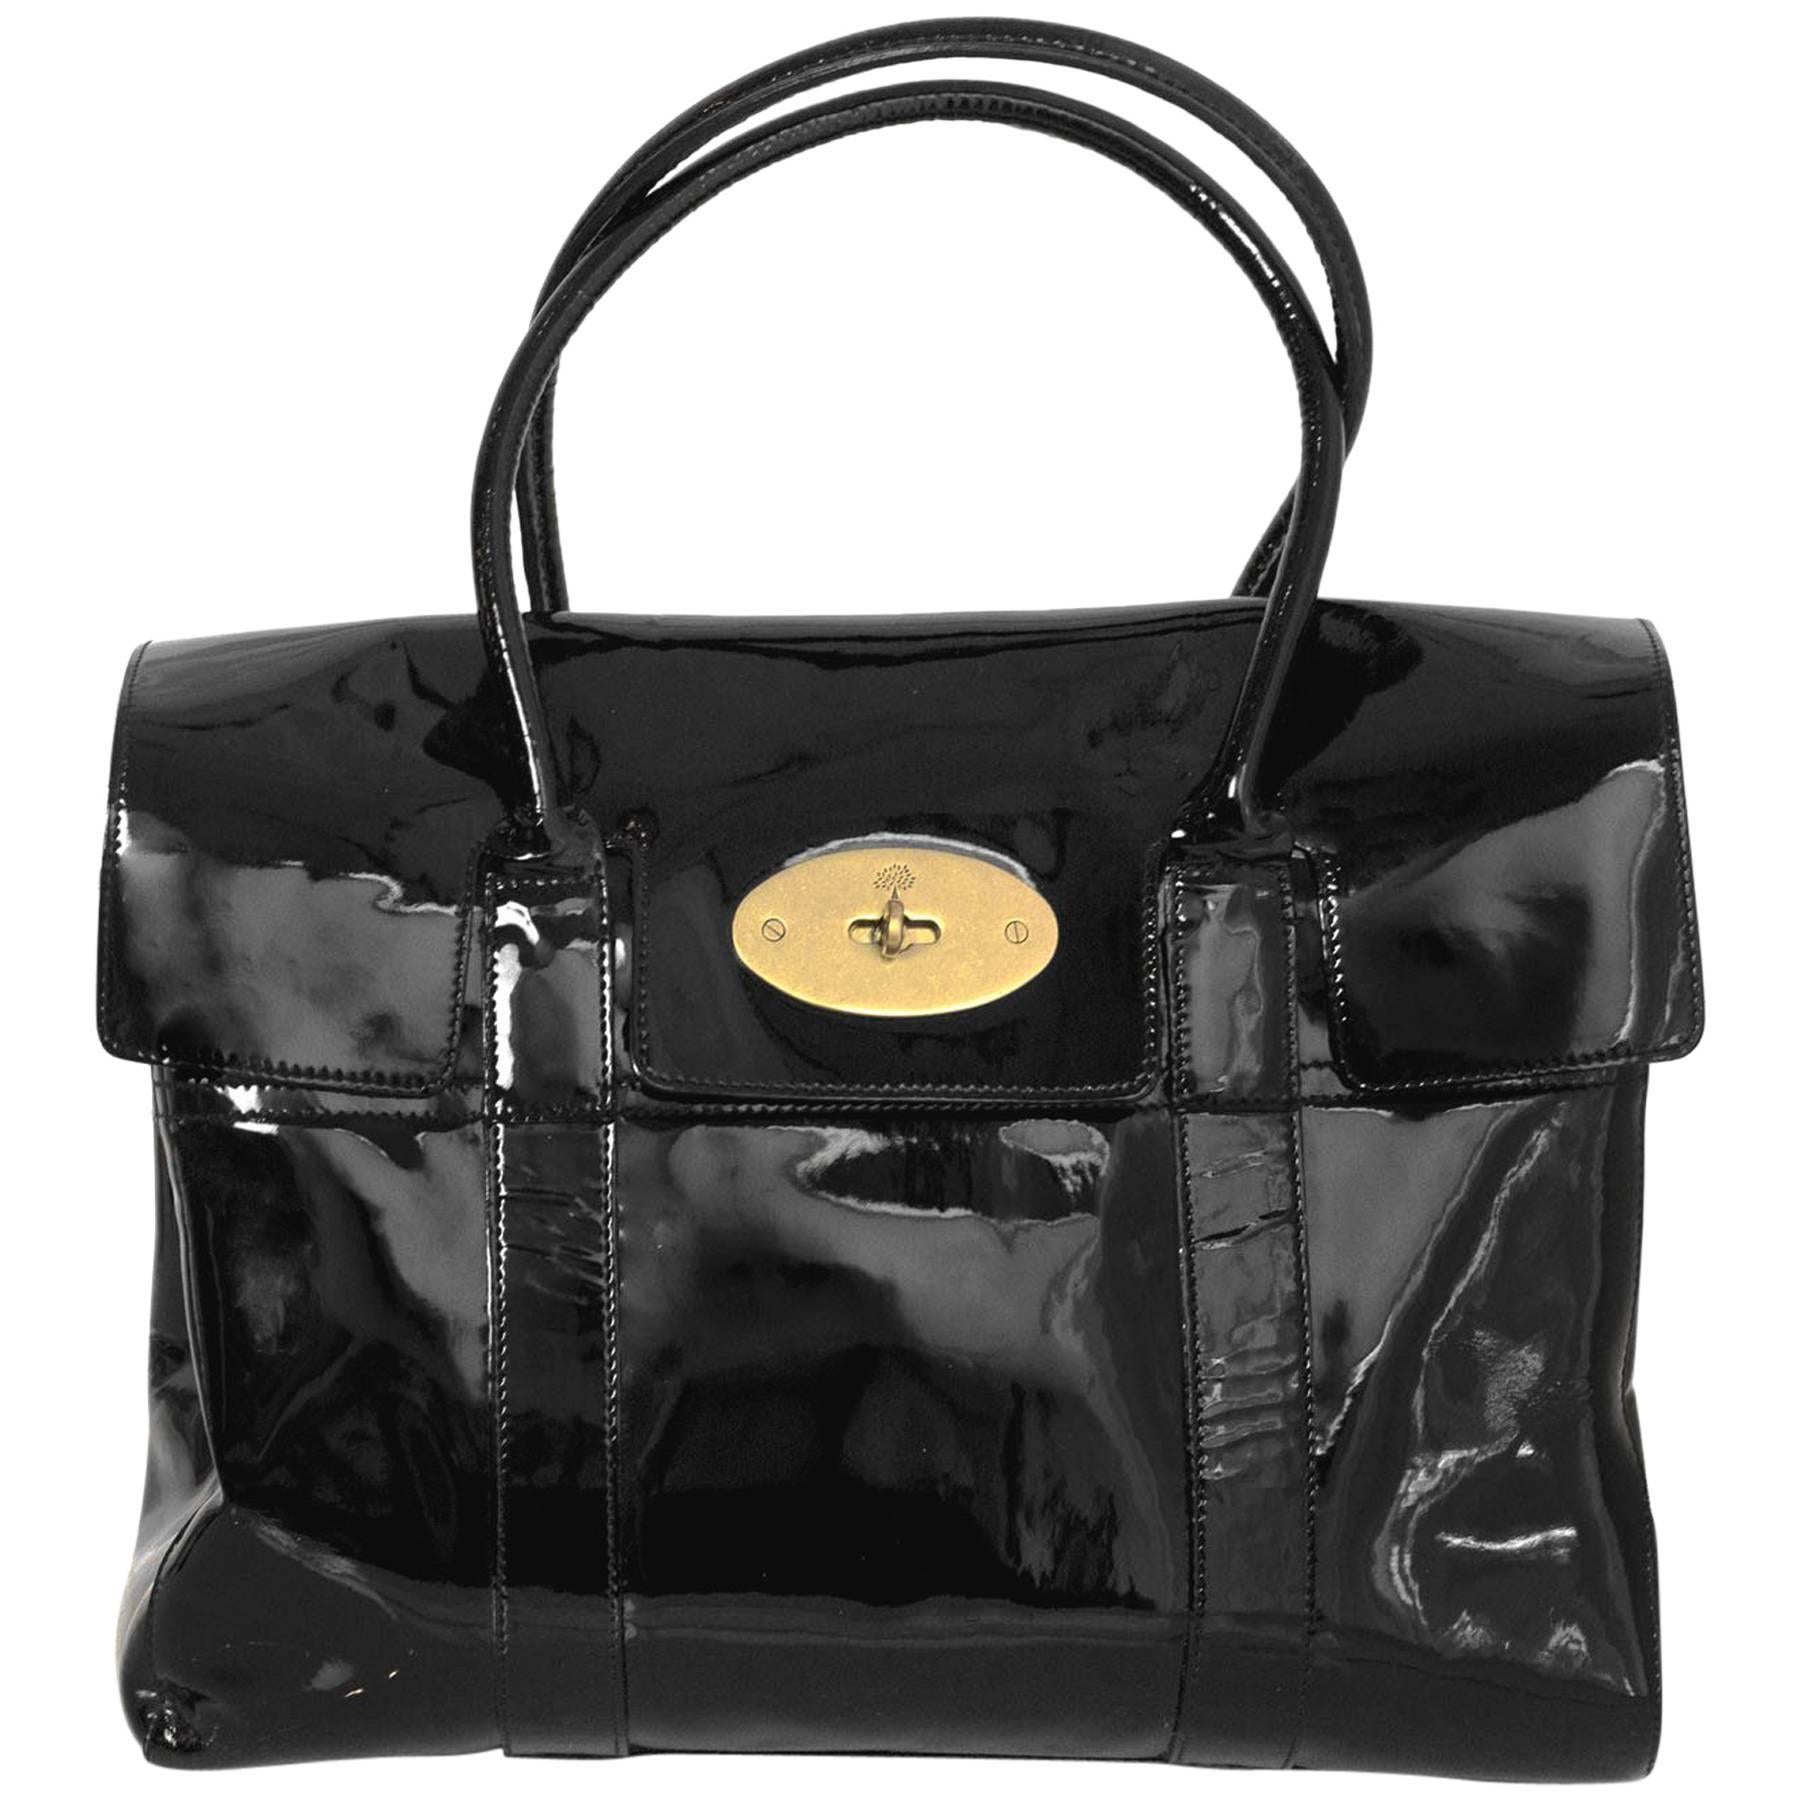 Mulberry Black Patent Leather Bayswater Tote Bag